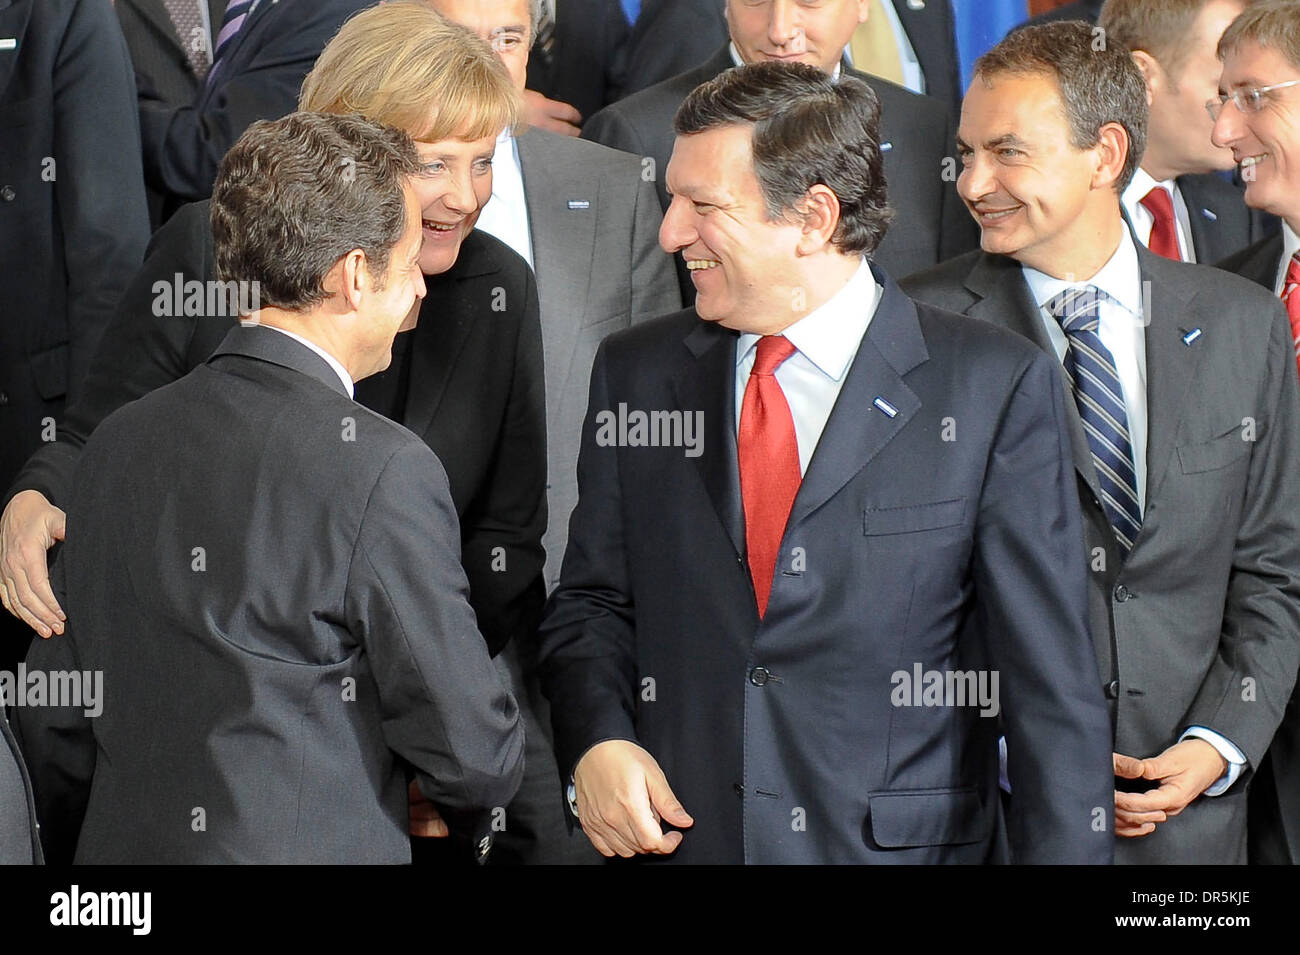 Mar 19, 2009 - Brussels, Belgium - (Left to Right) French President NICOLAS SARKOZY, German Chancellor ANGELA MERKEL, European Commission President JOSE MANUEL BARROSO, Spanish Prime Minister JOSE LUIS RODRIGUEZ ZAPATERO, Hungarian Prime Minister FERENC GYURCSANY during the group photo time on the first day of the European Heads of State Summit. (Credit Image: © Wiktor Dabkowski/ZU Stock Photo